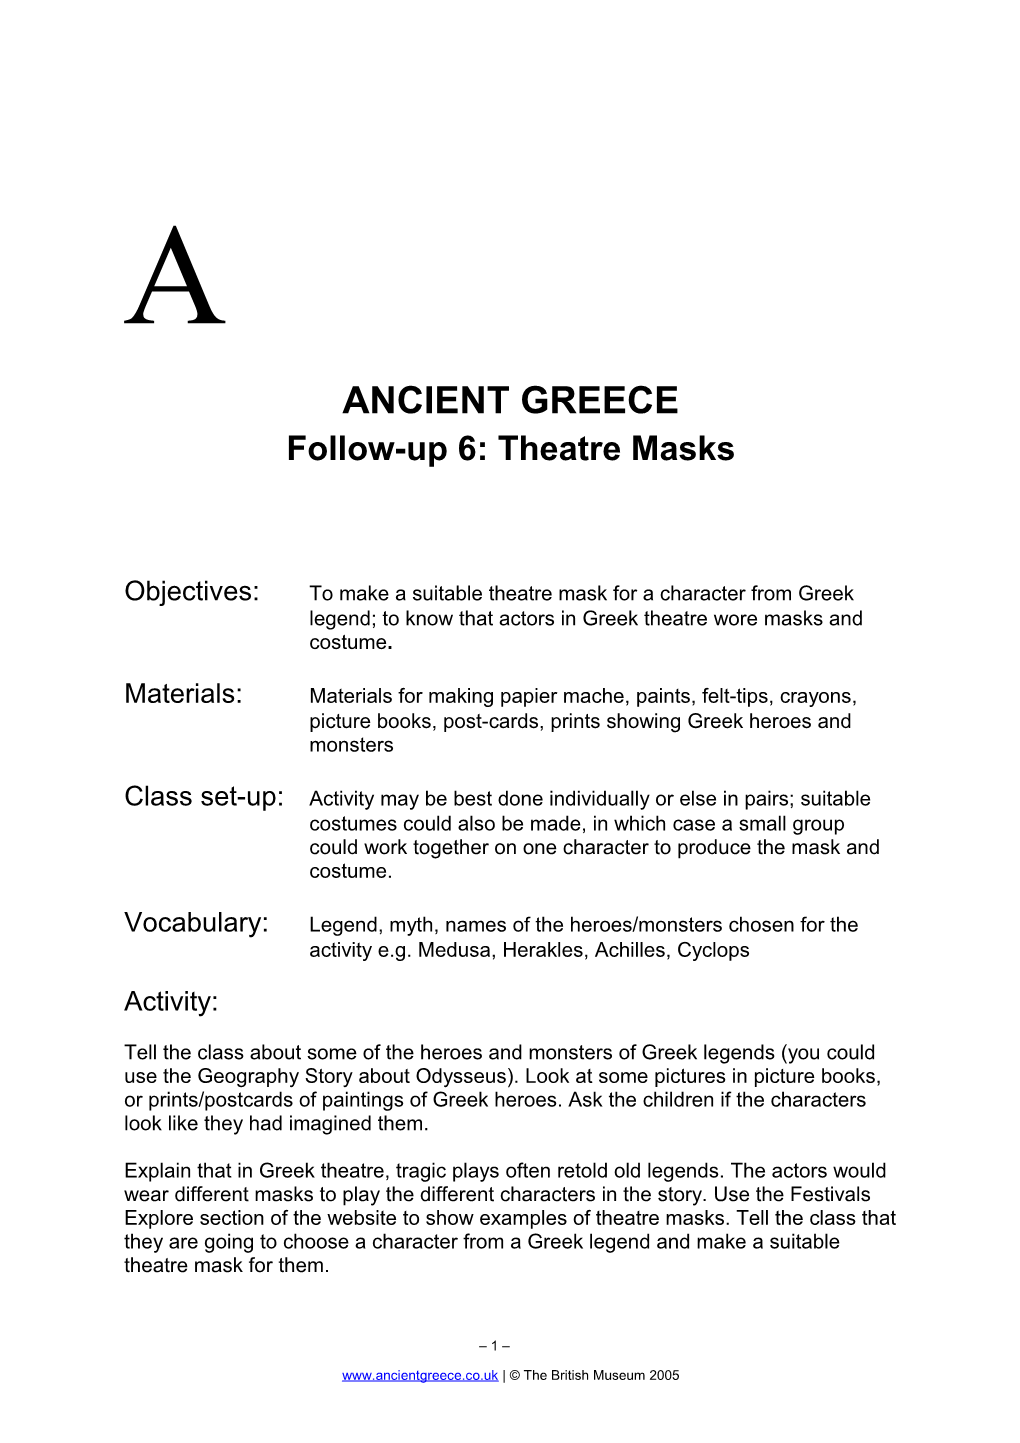 Objectives: to Make a Suitable Theatre Mask for a Character from Greek